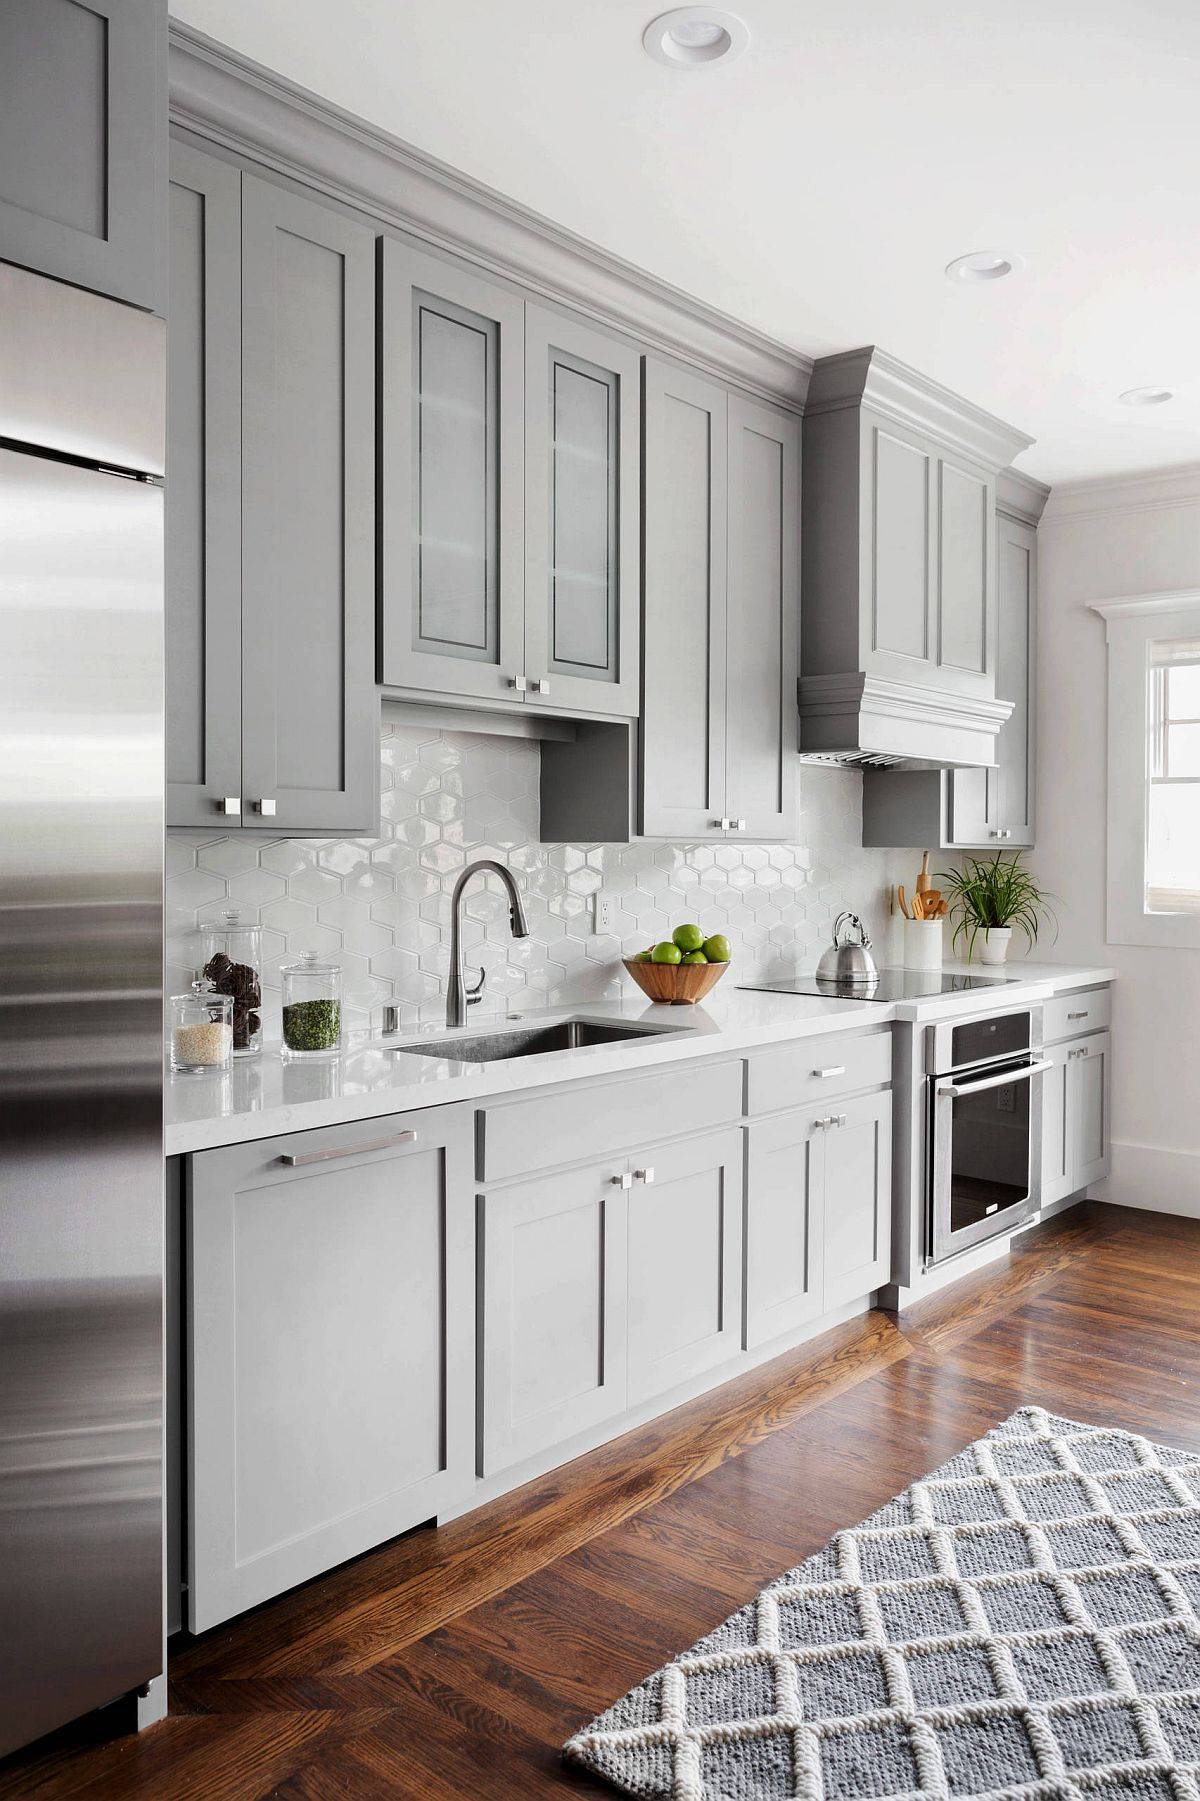 Monochromatic single-wall kitchen offers ample storage while seemingly blending into the backdrop